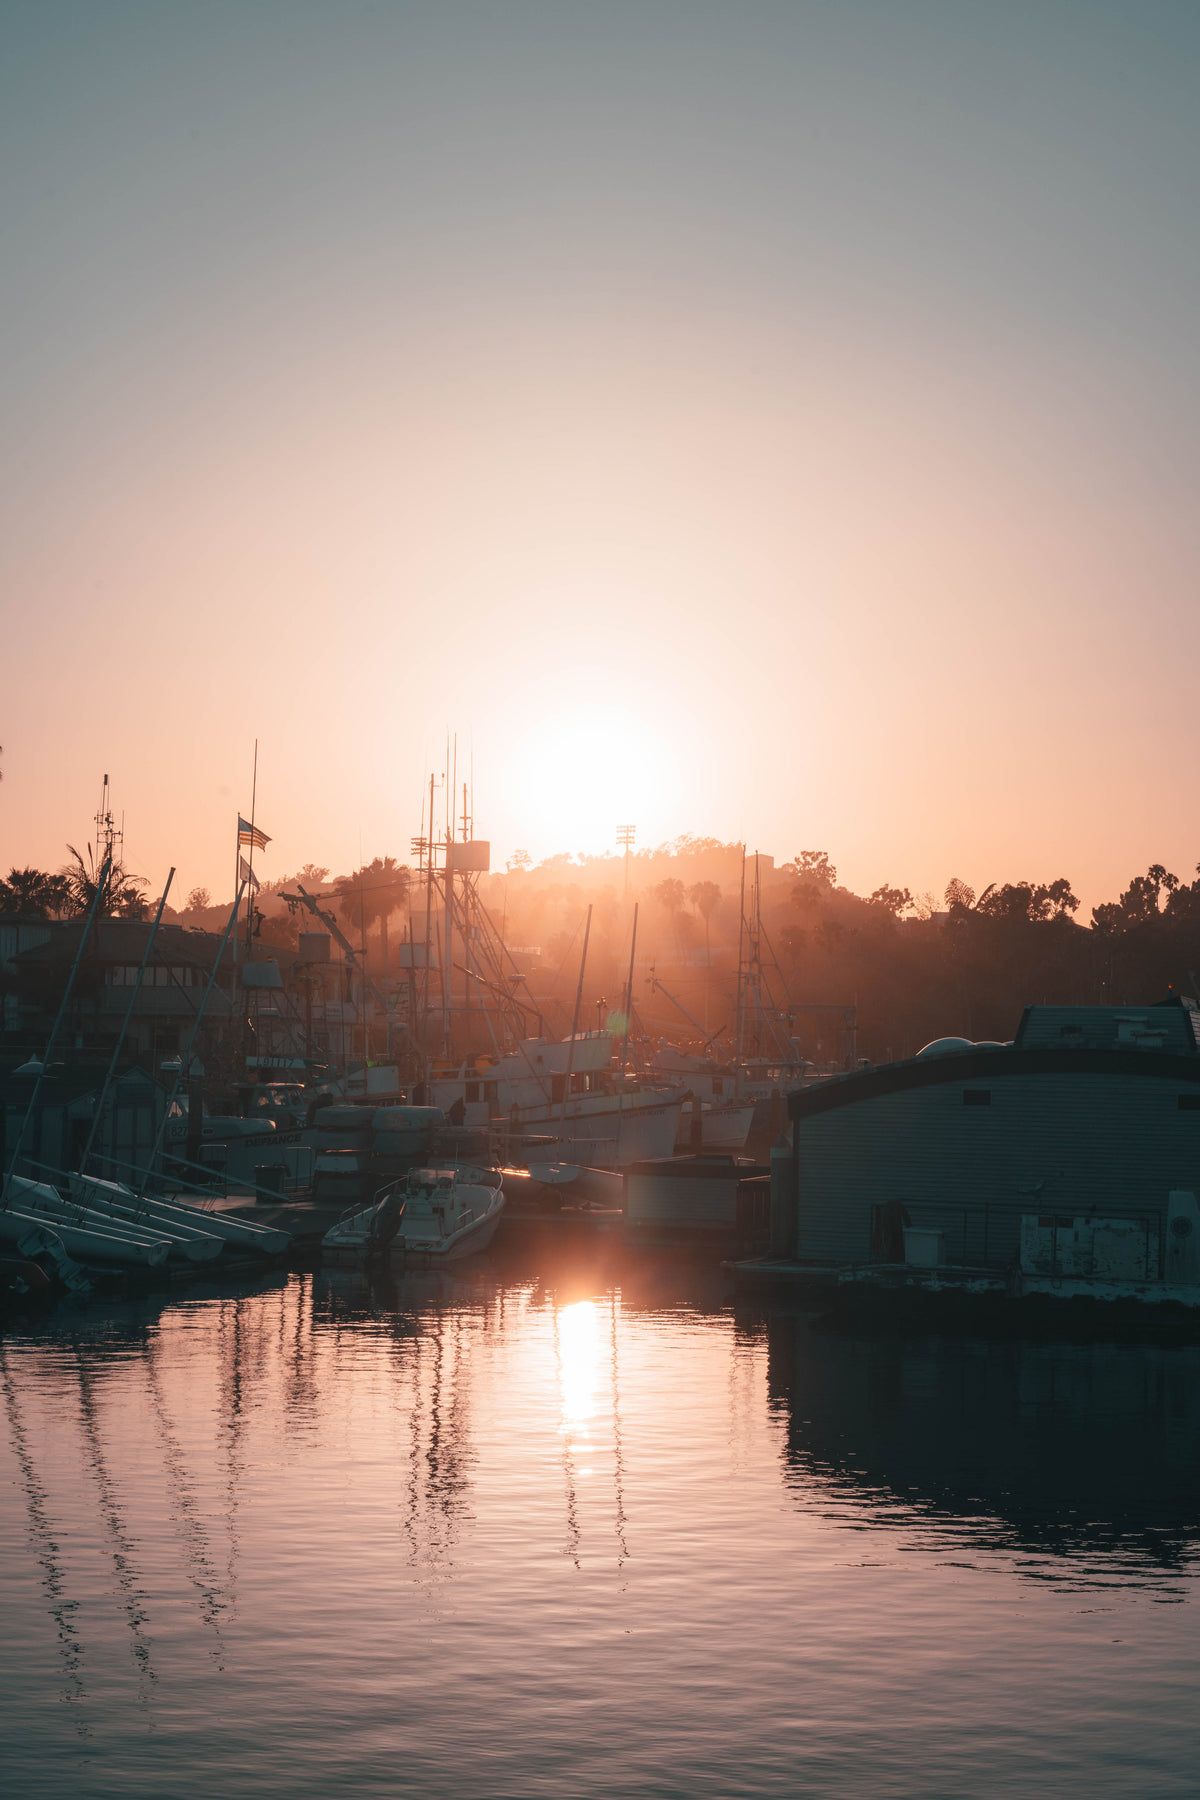 As a sunset over the water with boats - Sunrise